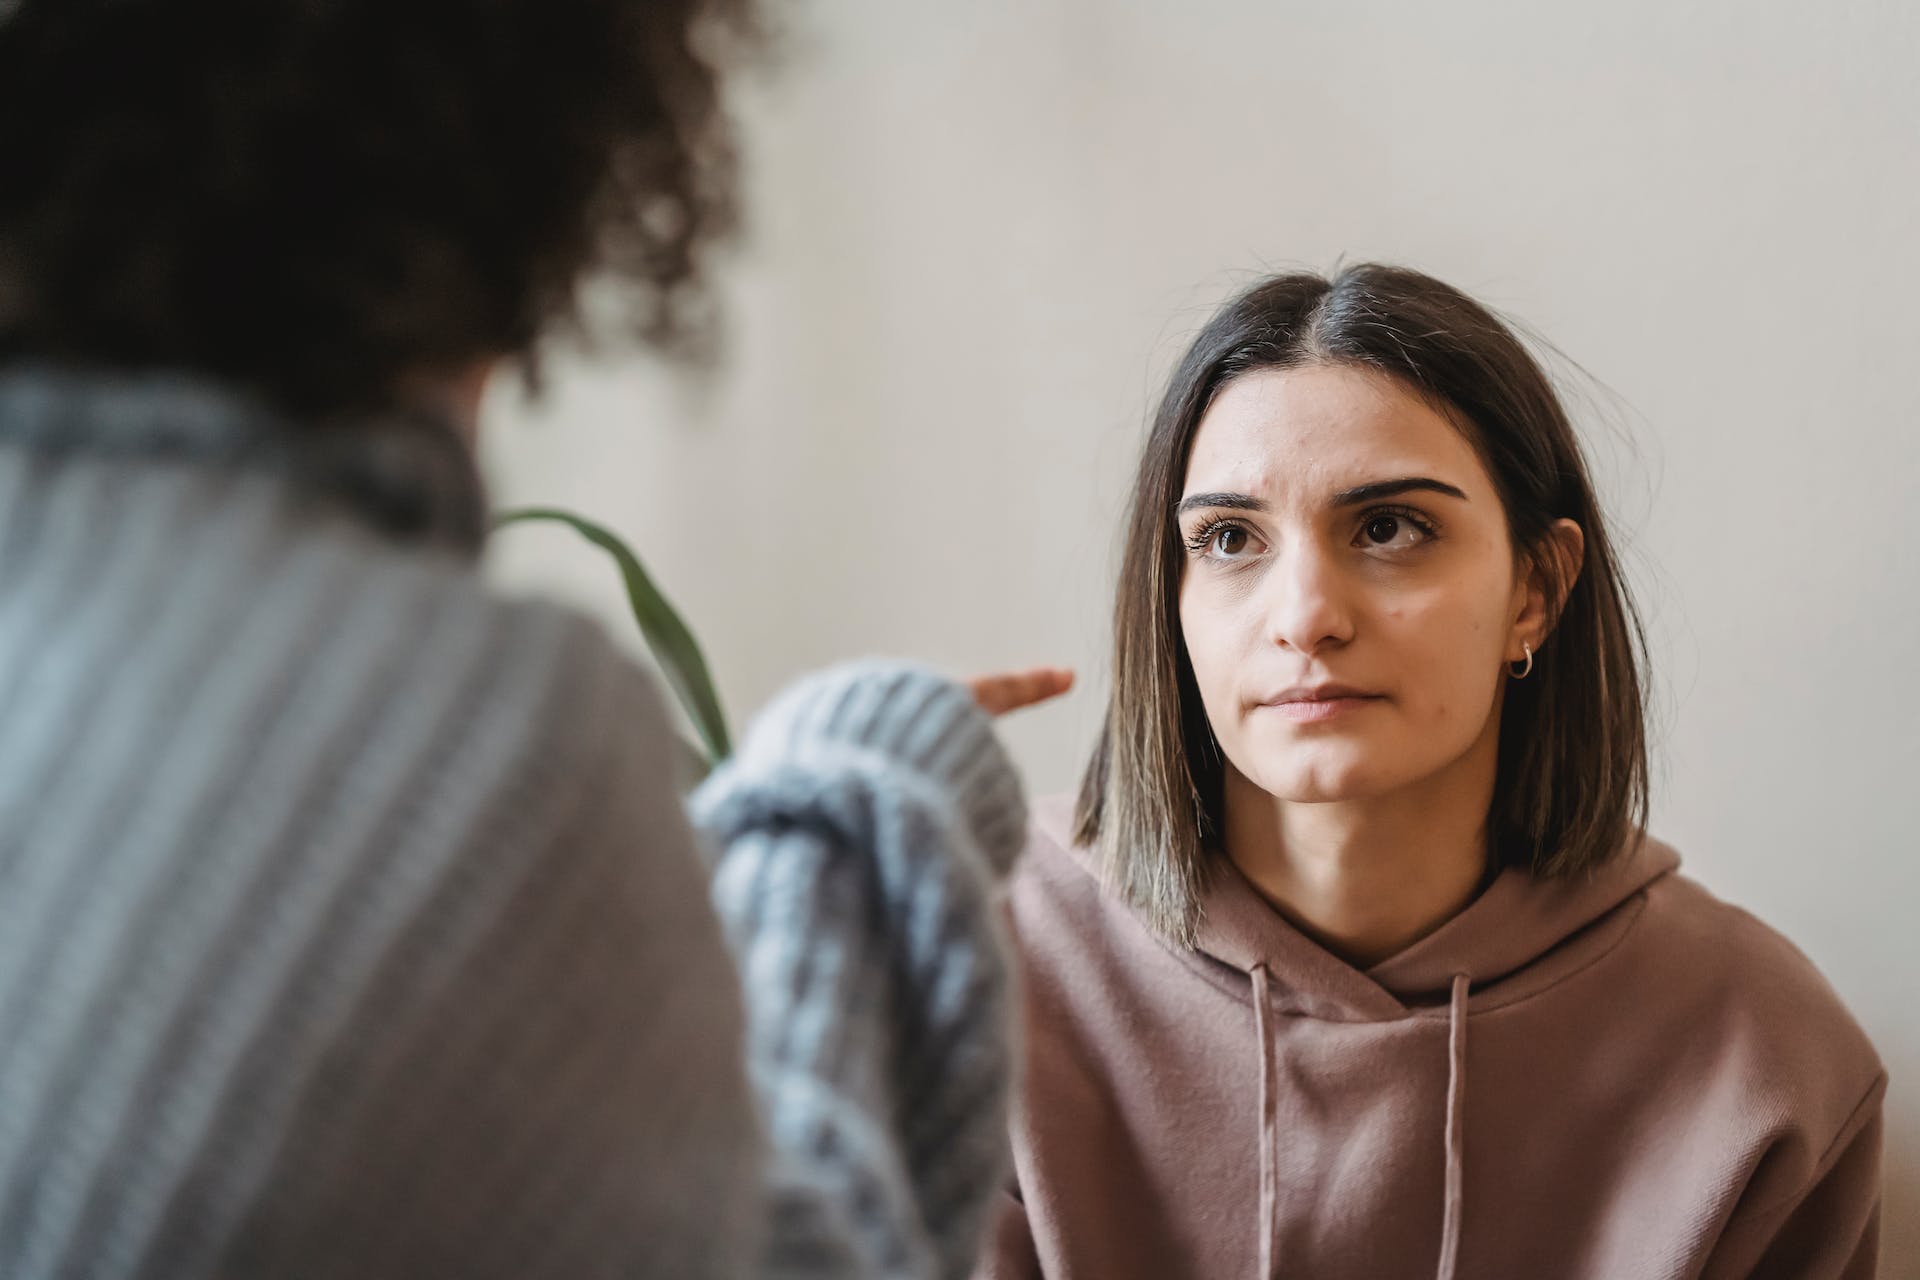 A woman arguing with another woman | Source: Pexels